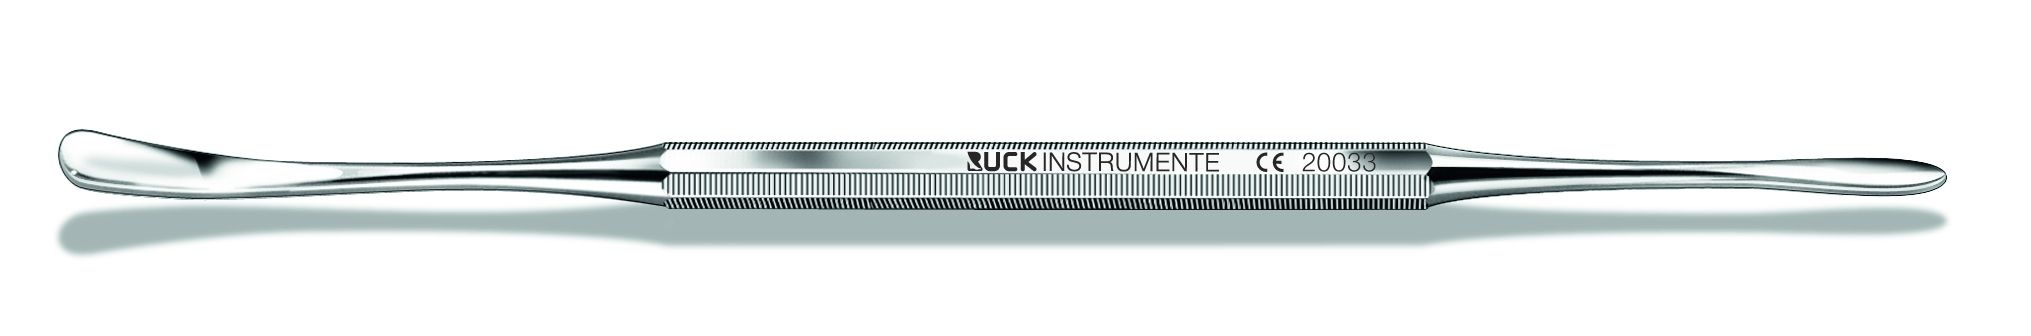 RUCK INSTRUMENTS NAIL FOLD INSTRUMENT / DOUBLE SIDED / STAINLESS STEEL / 16CM / ROUNDED / ROUND/ BLUNT photo